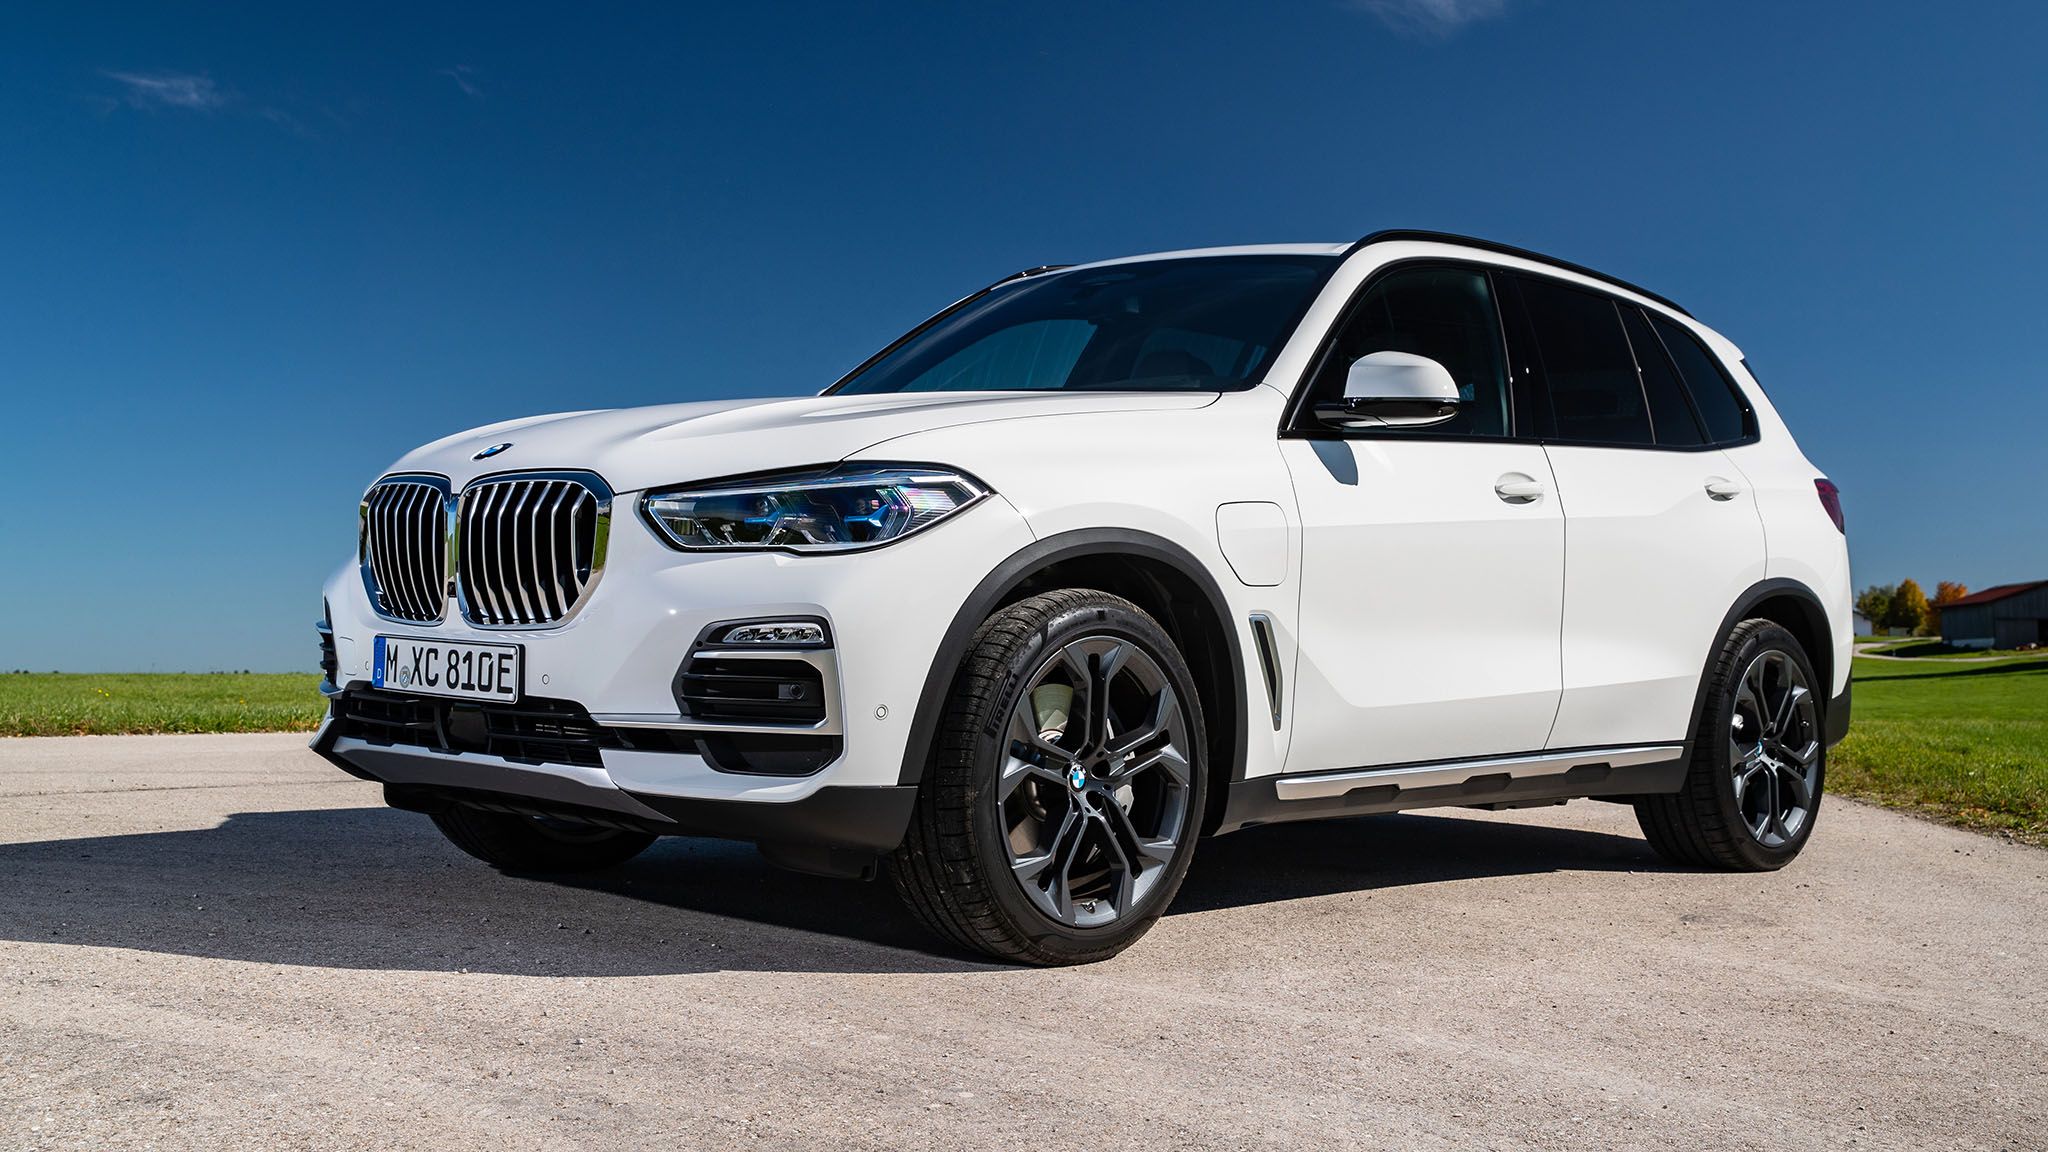 BMW X5 Plug In Hybrid Finally Arrives, Brings More Range And Power